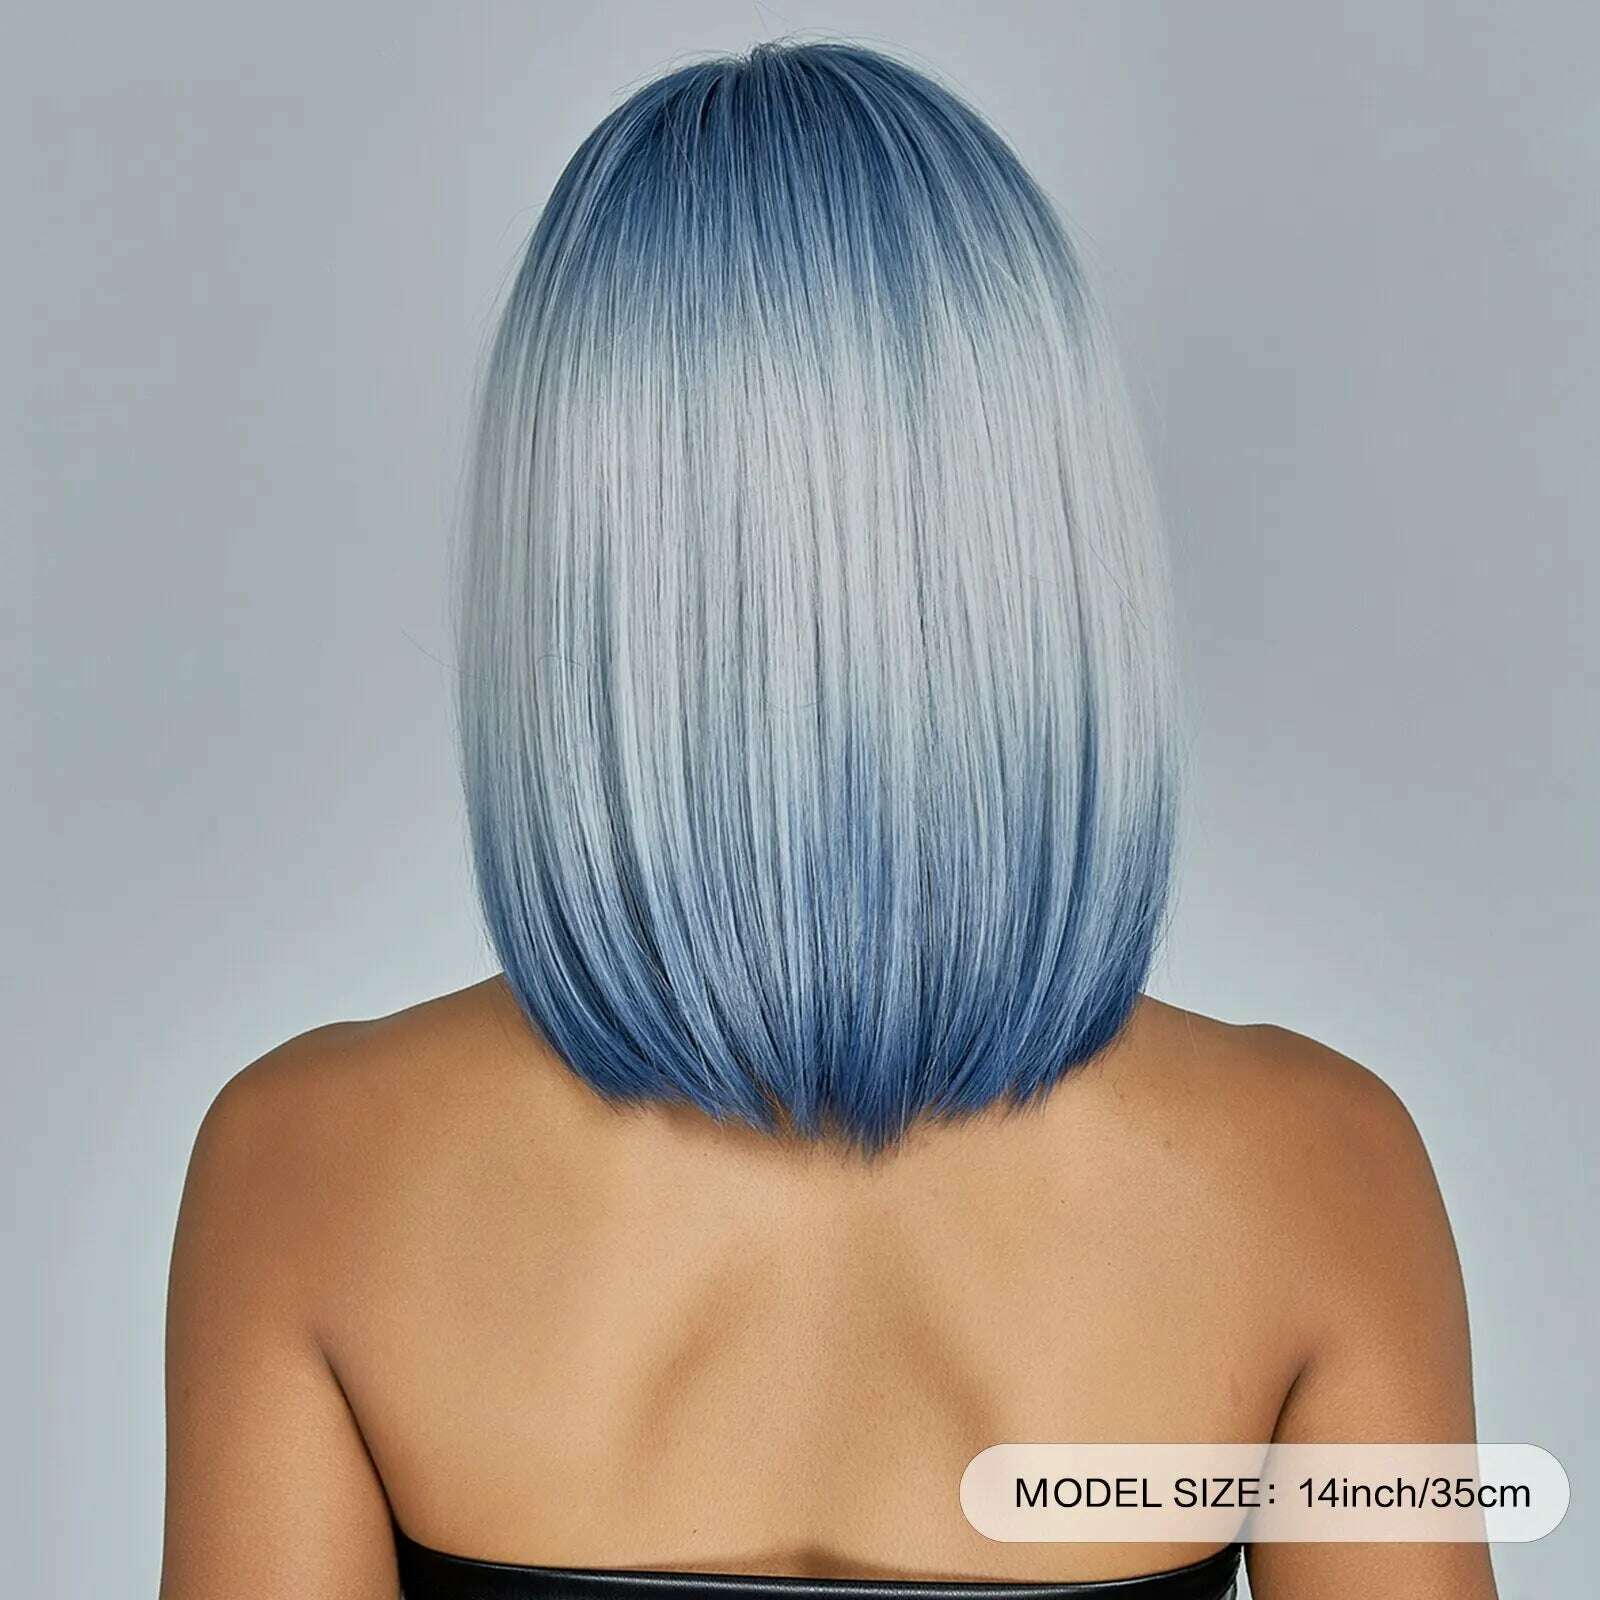 KIMLUD, Medium Length Blue White Ombre Straight Synthetic Hair With Bangs Short Bob Cosplay Wig for Women Daily Party Heat Resistant, KIMLUD Womens Clothes